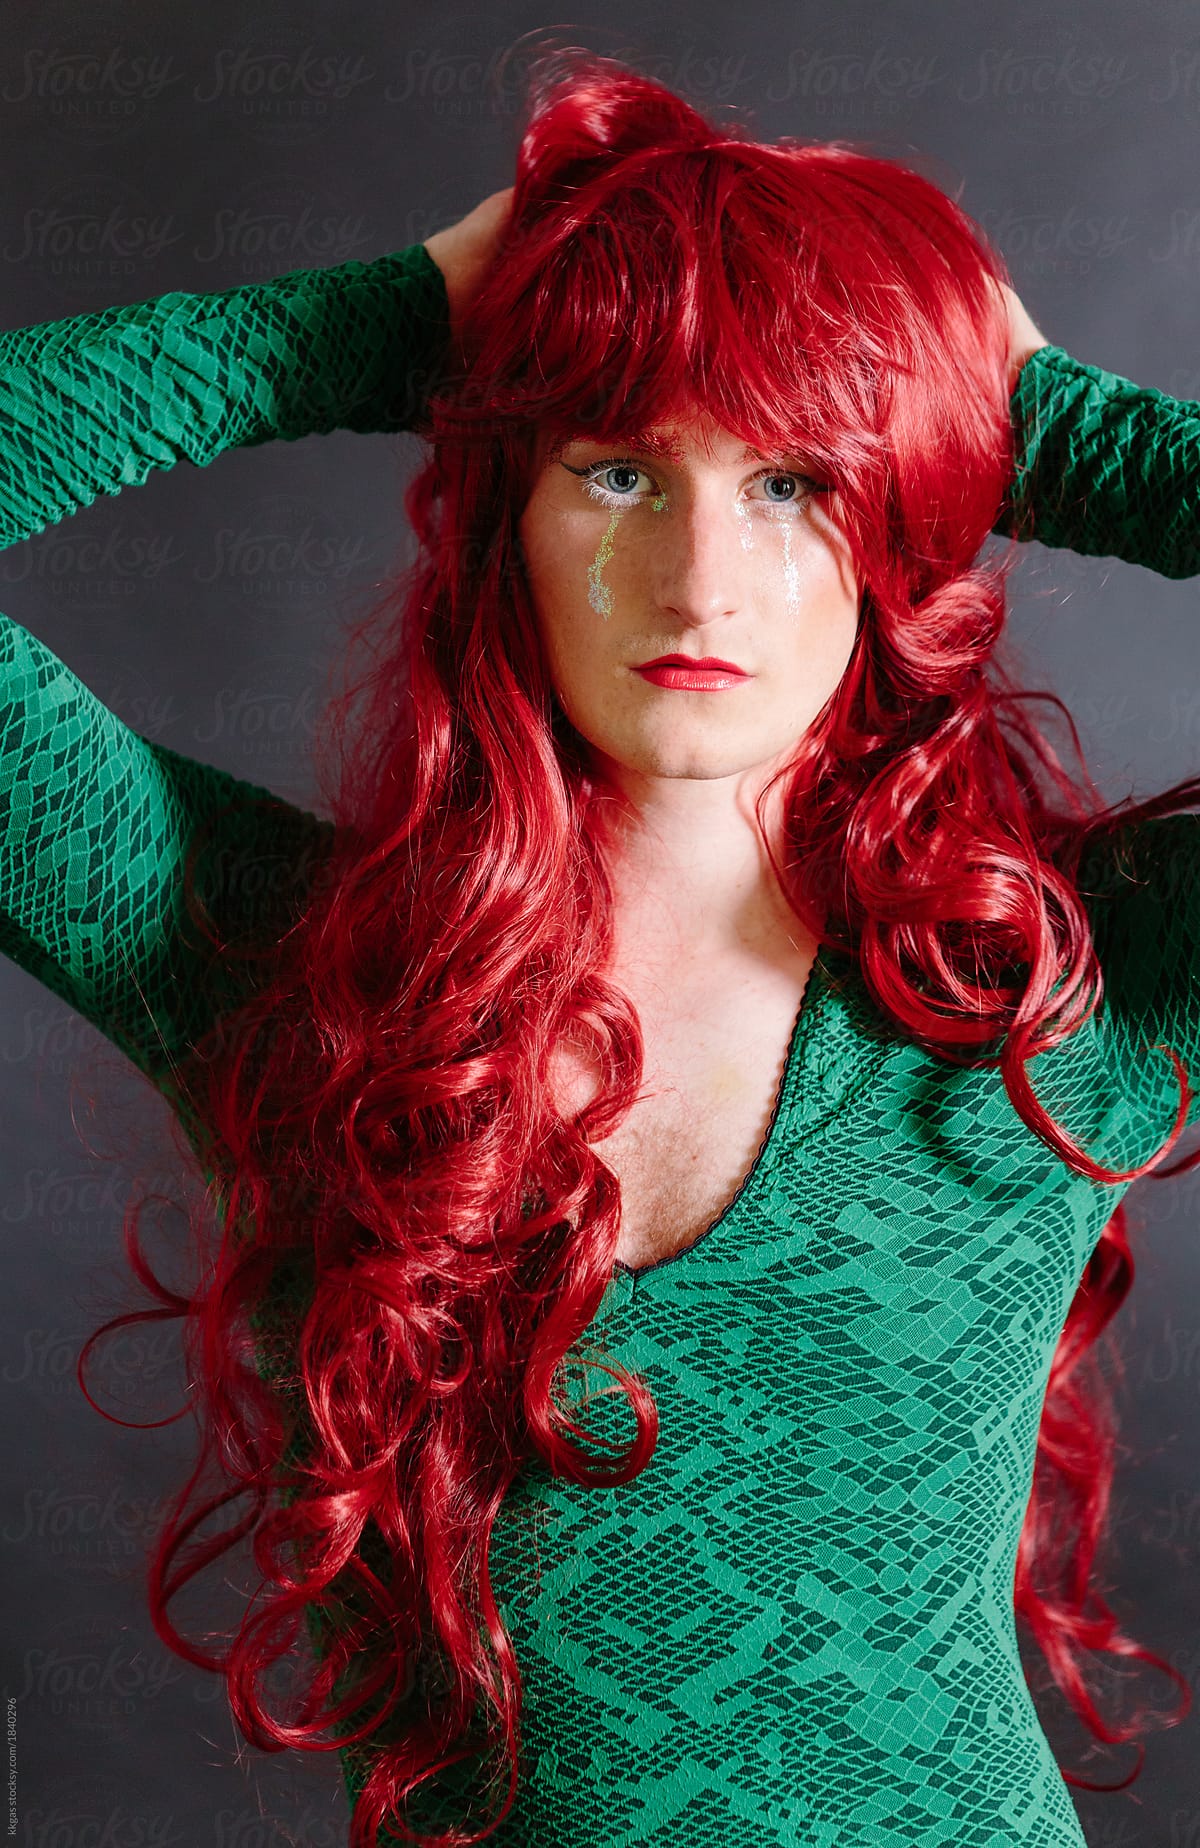 Non Binary Guy In Drag Wearing Green Dress And Red Wig By Stocksy